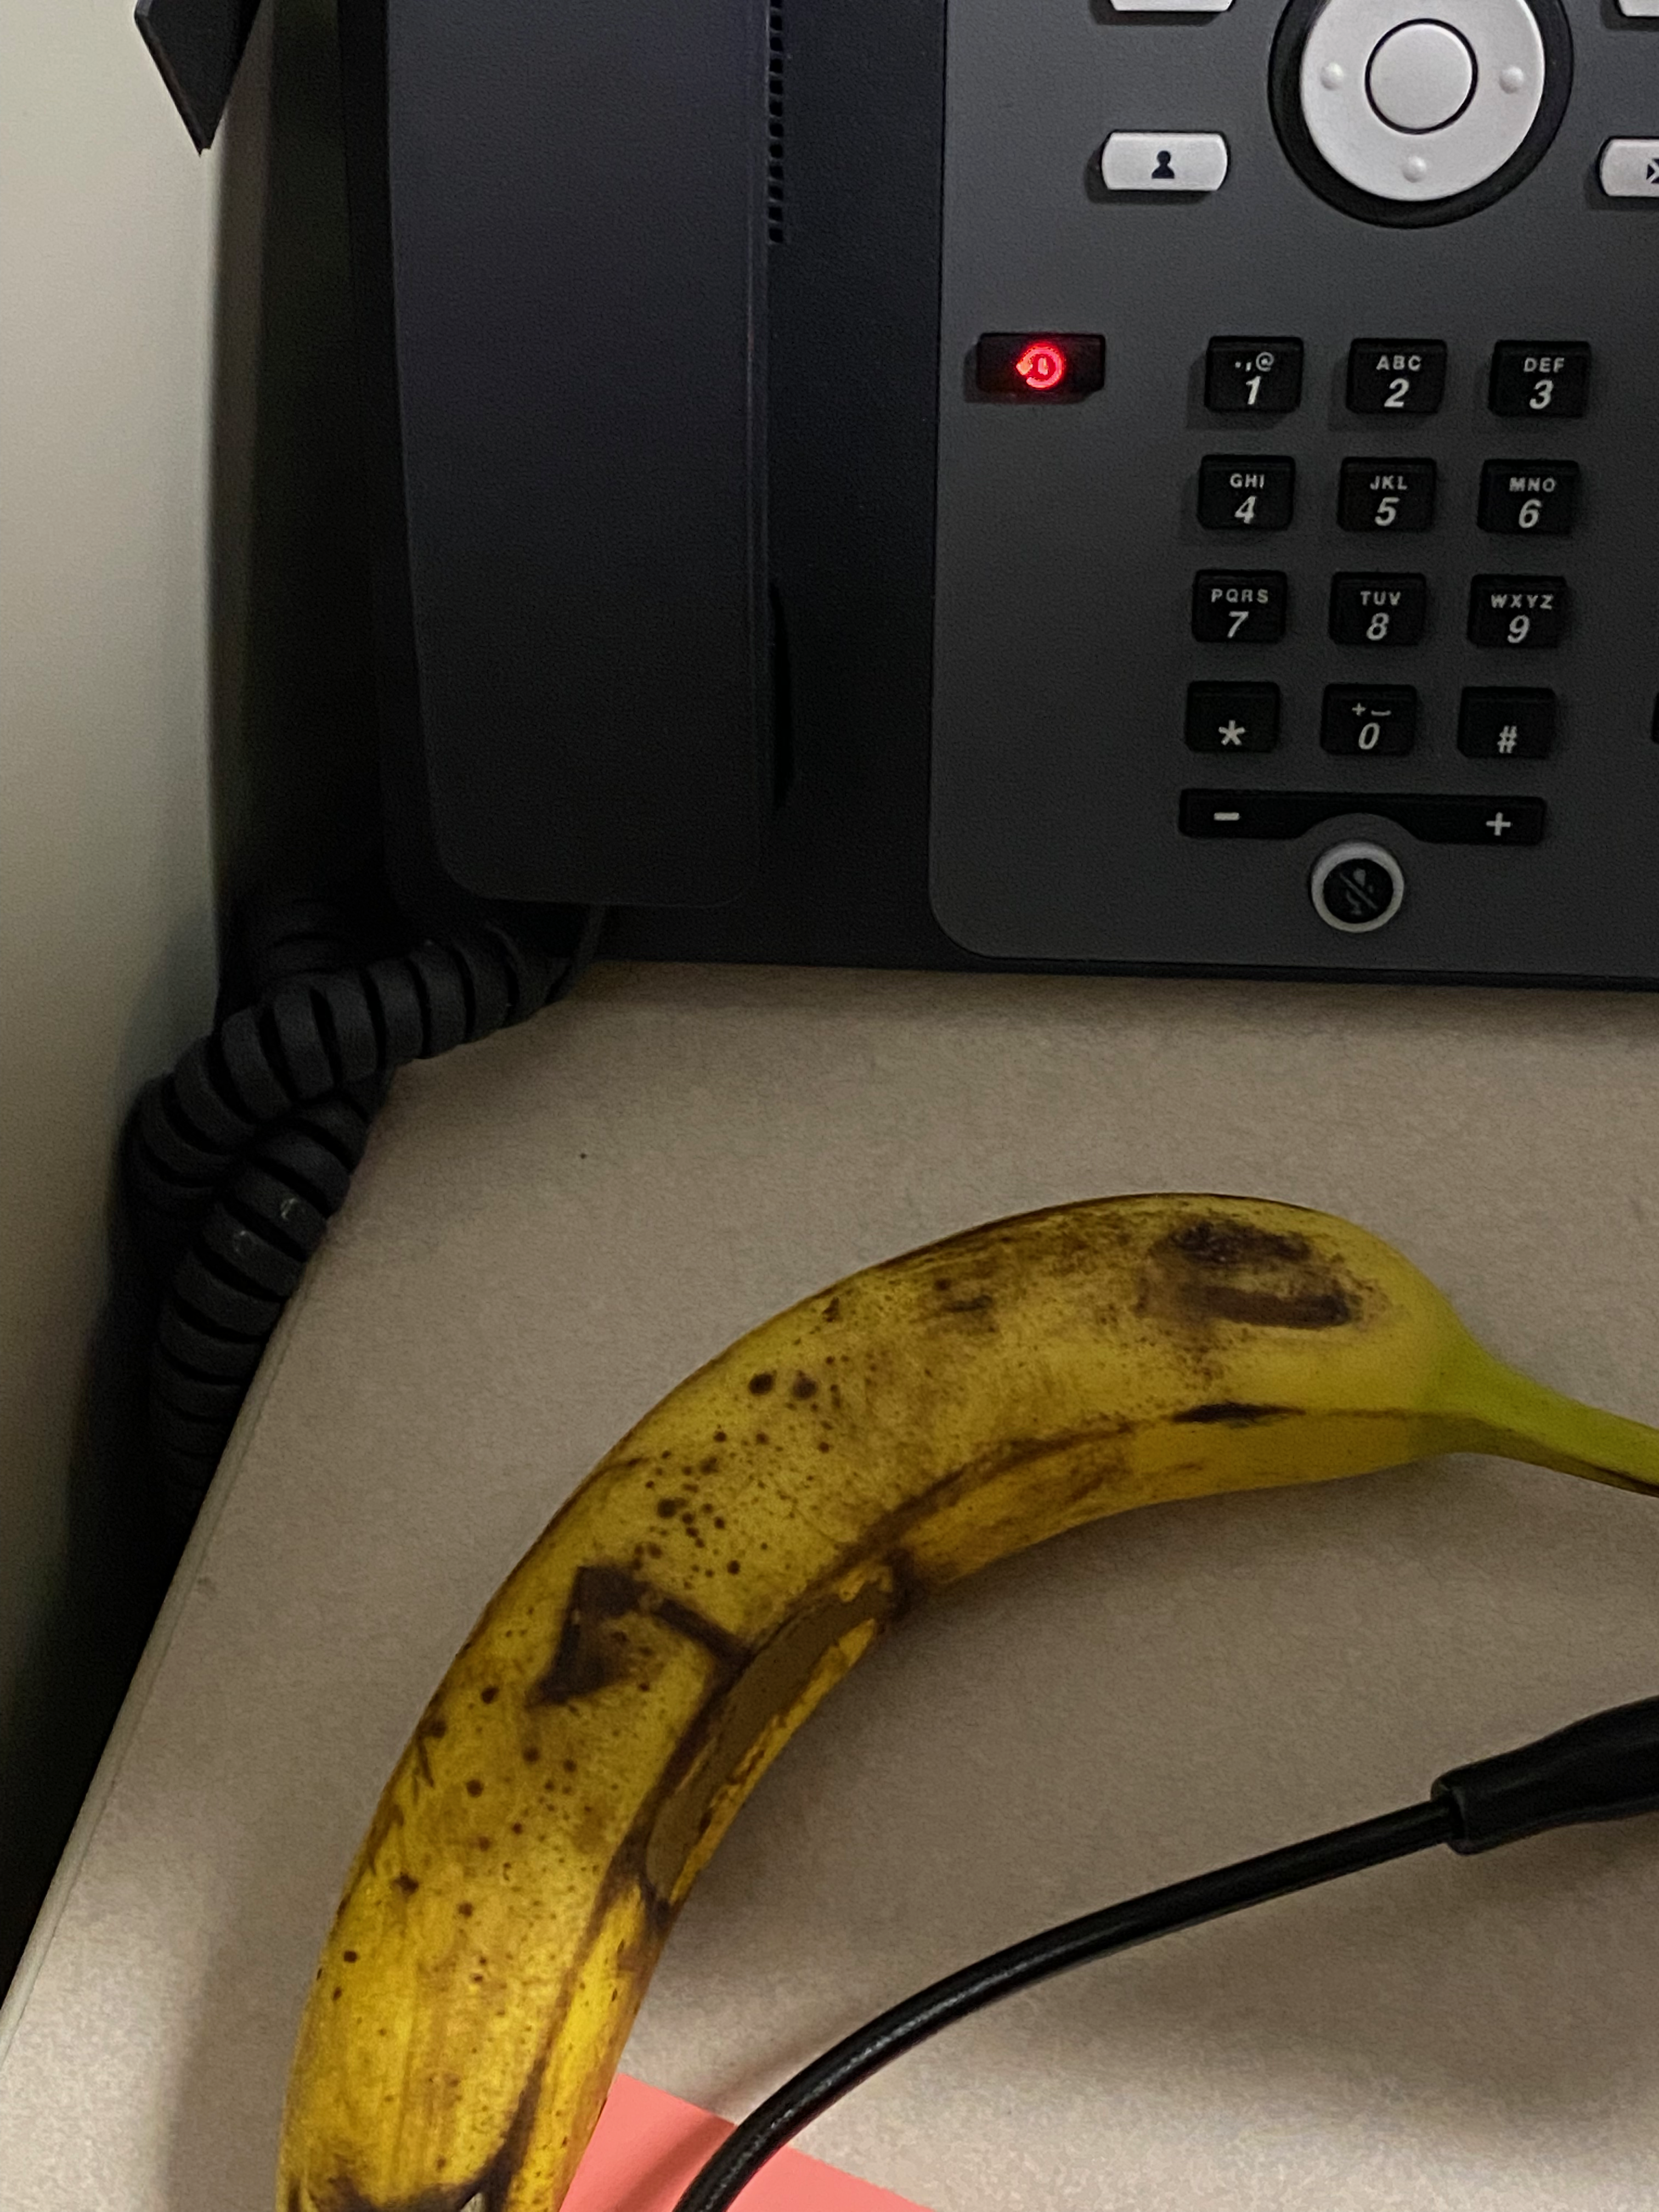 It's a picture of a ripe looking banana in front of a phone beside a non-descript black cord. The corner of a pad of sticky notes is visible at the bottom edge of the frame.